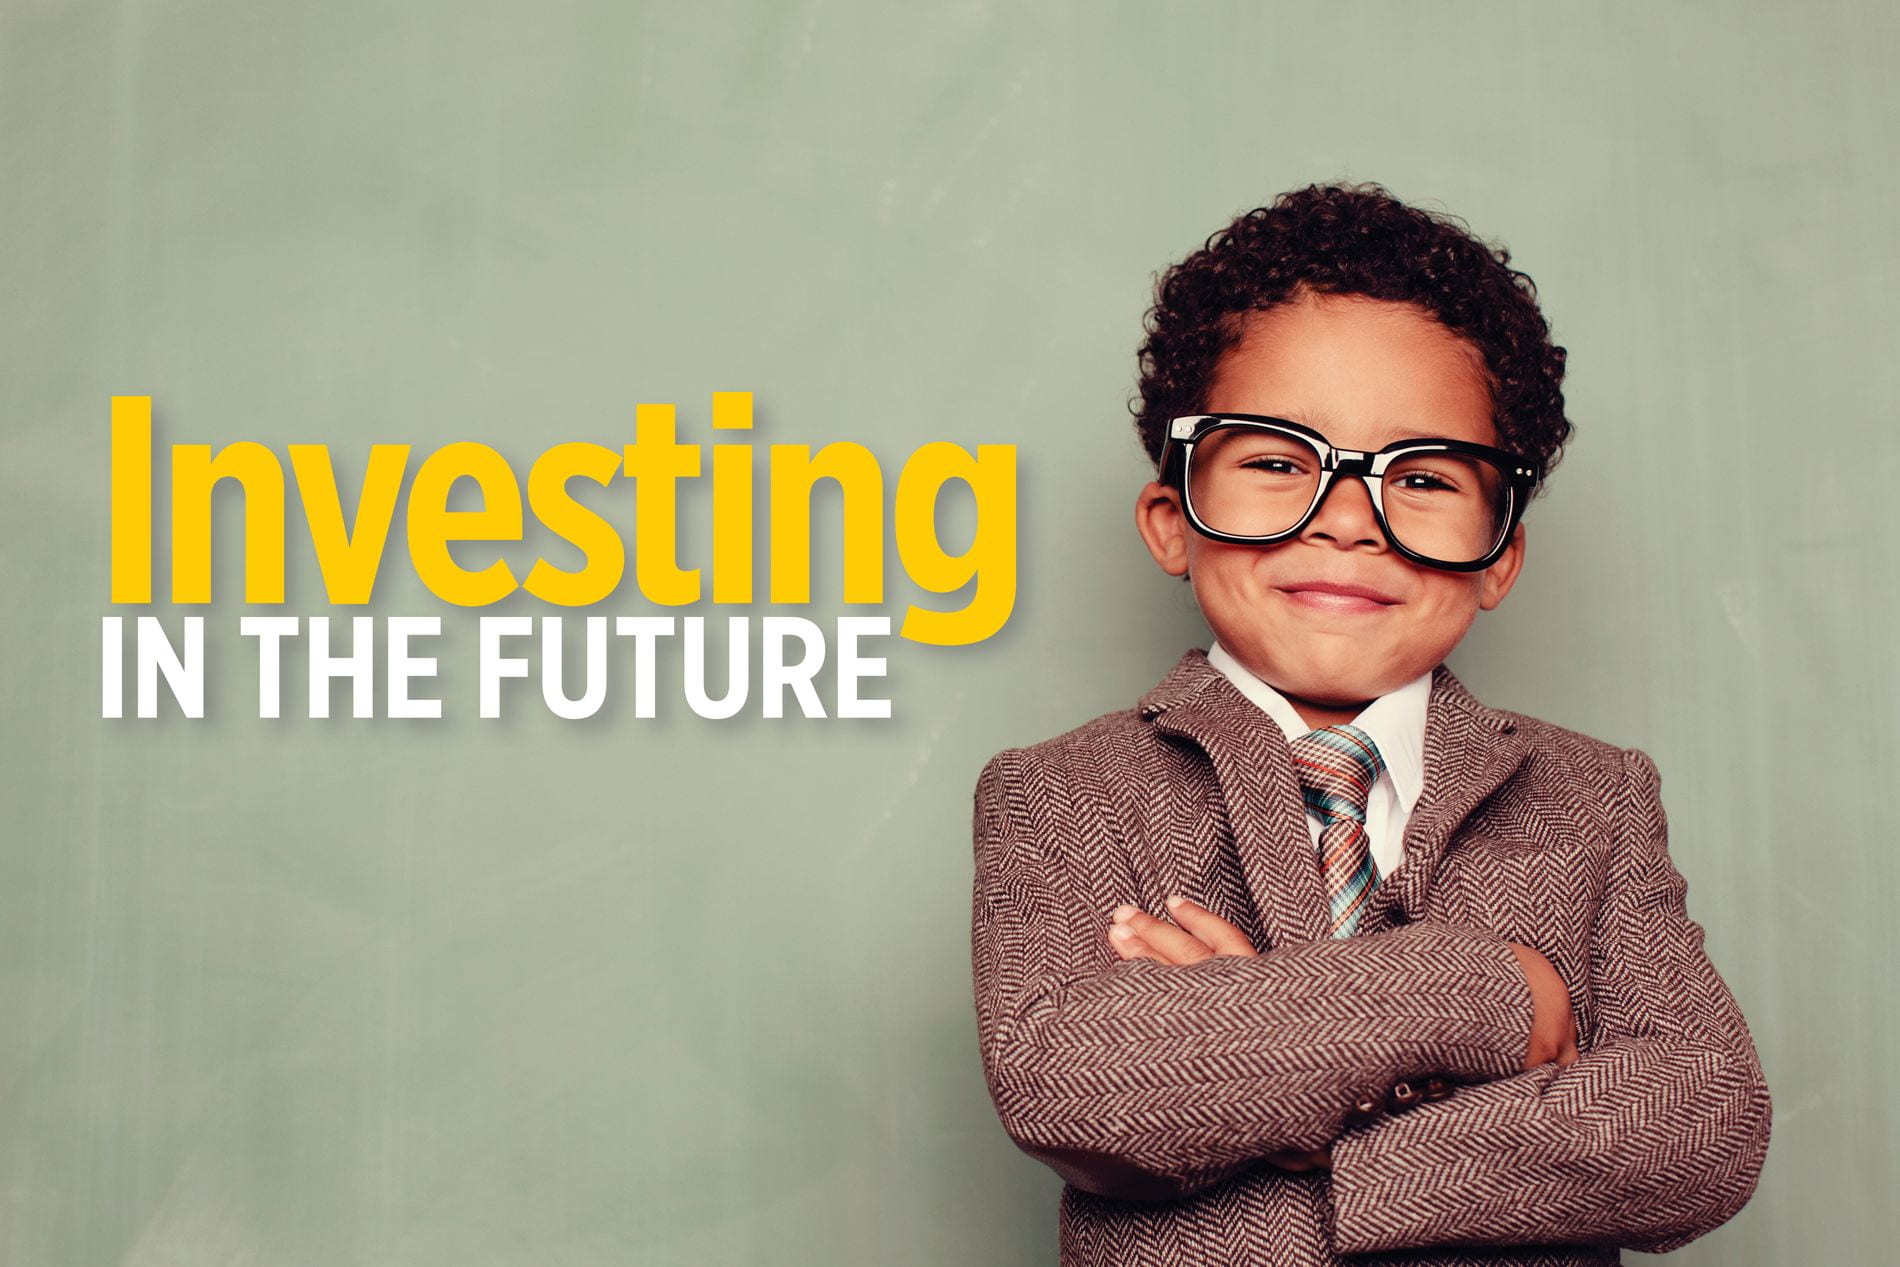 Investing in the Future: a young child in a suit with his arms crossed looking confident and smiling